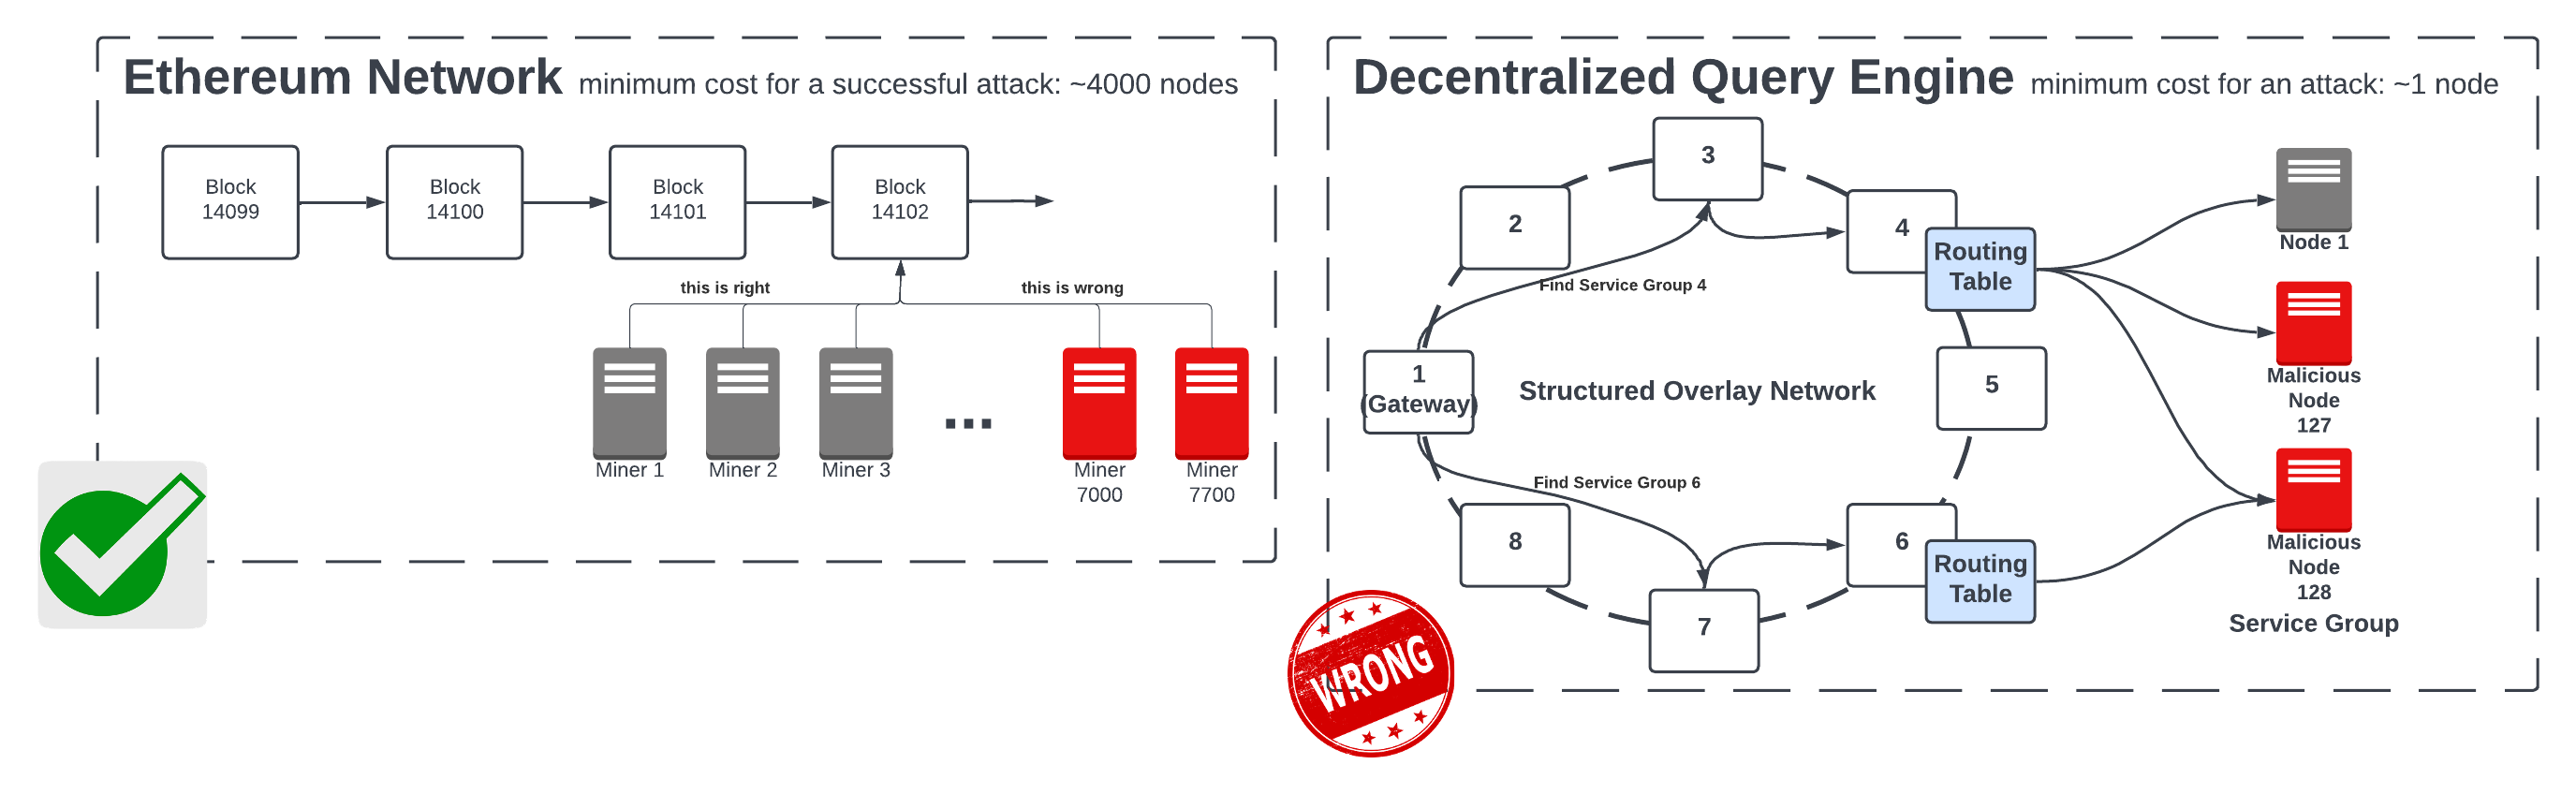 An example of how a decentralized query engine is disproportionately vulnerable to malicious nodes. The top half depicts the Ethereum network, where all compute resources are working on the same task. Thus, a malicious attack would require the majority (~4000/8000) of nodes to be malicious. For platforms like The Graph, this ratio is much lower, as different subnetworks are computing different tasks. Thus, for certain tasks (e.g., to Service Group 6), only a single malicious node would be needed to corrupt output.